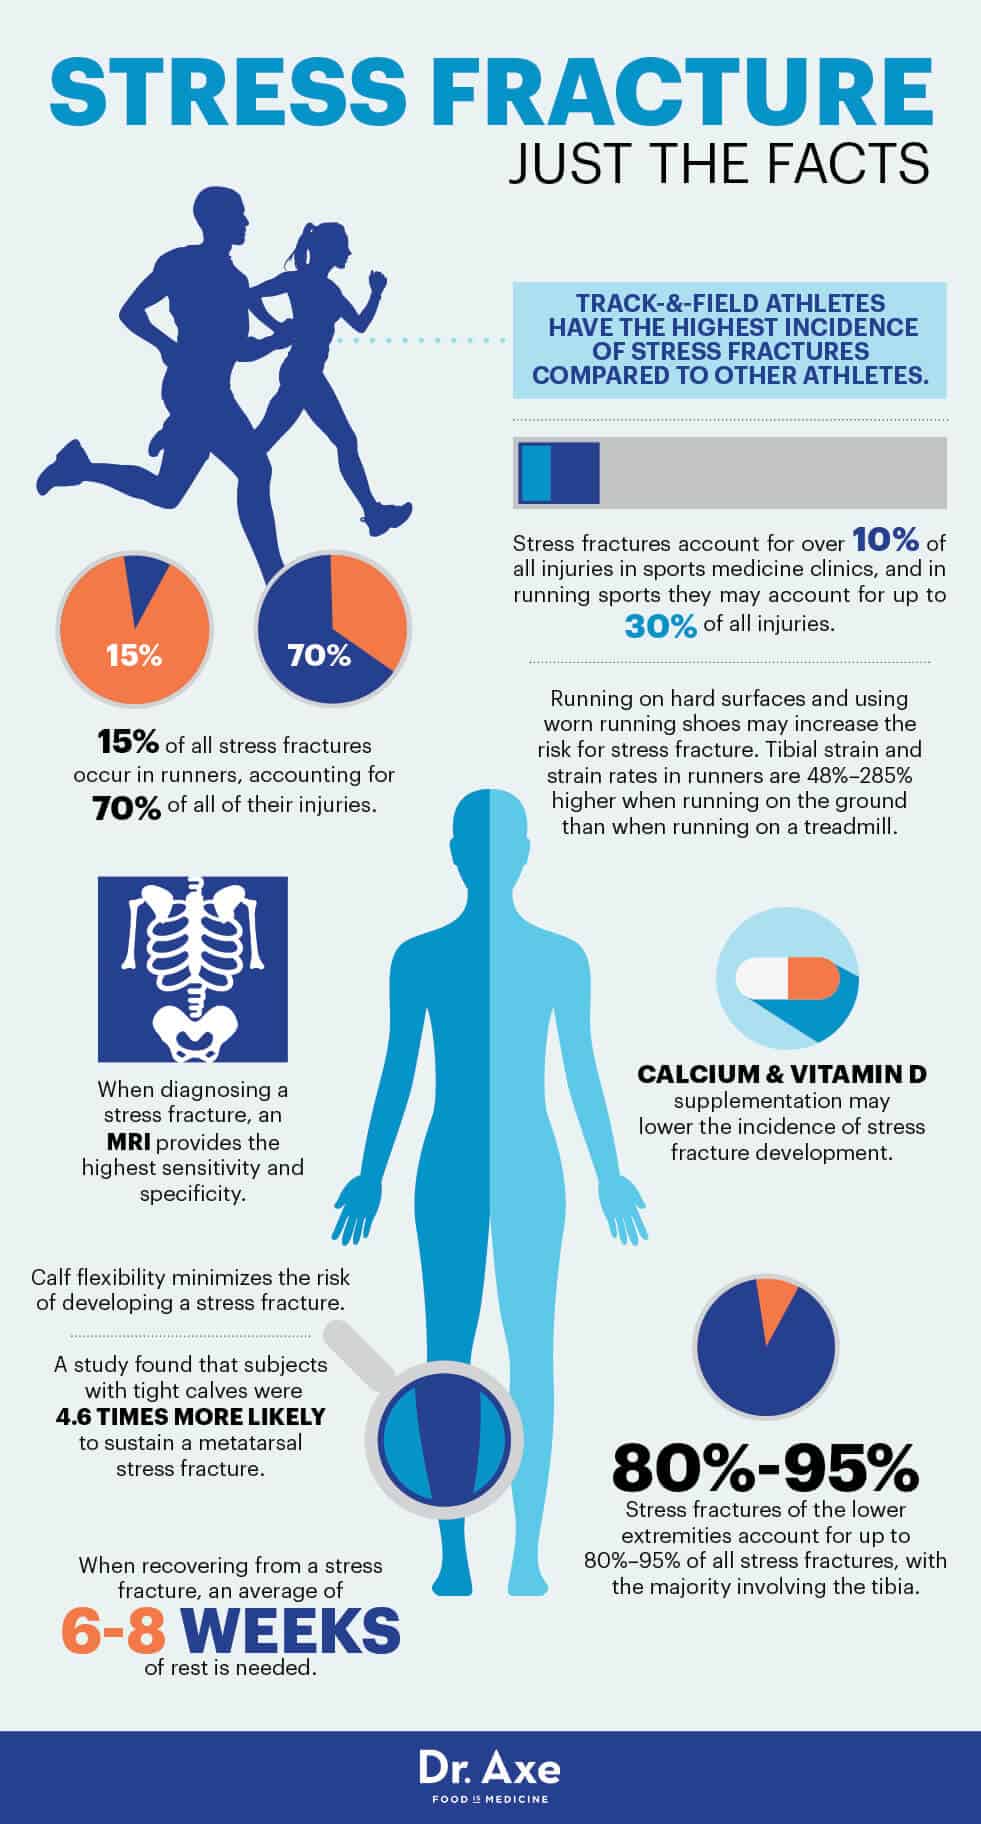 Stress fracture facts - Dr. Axe